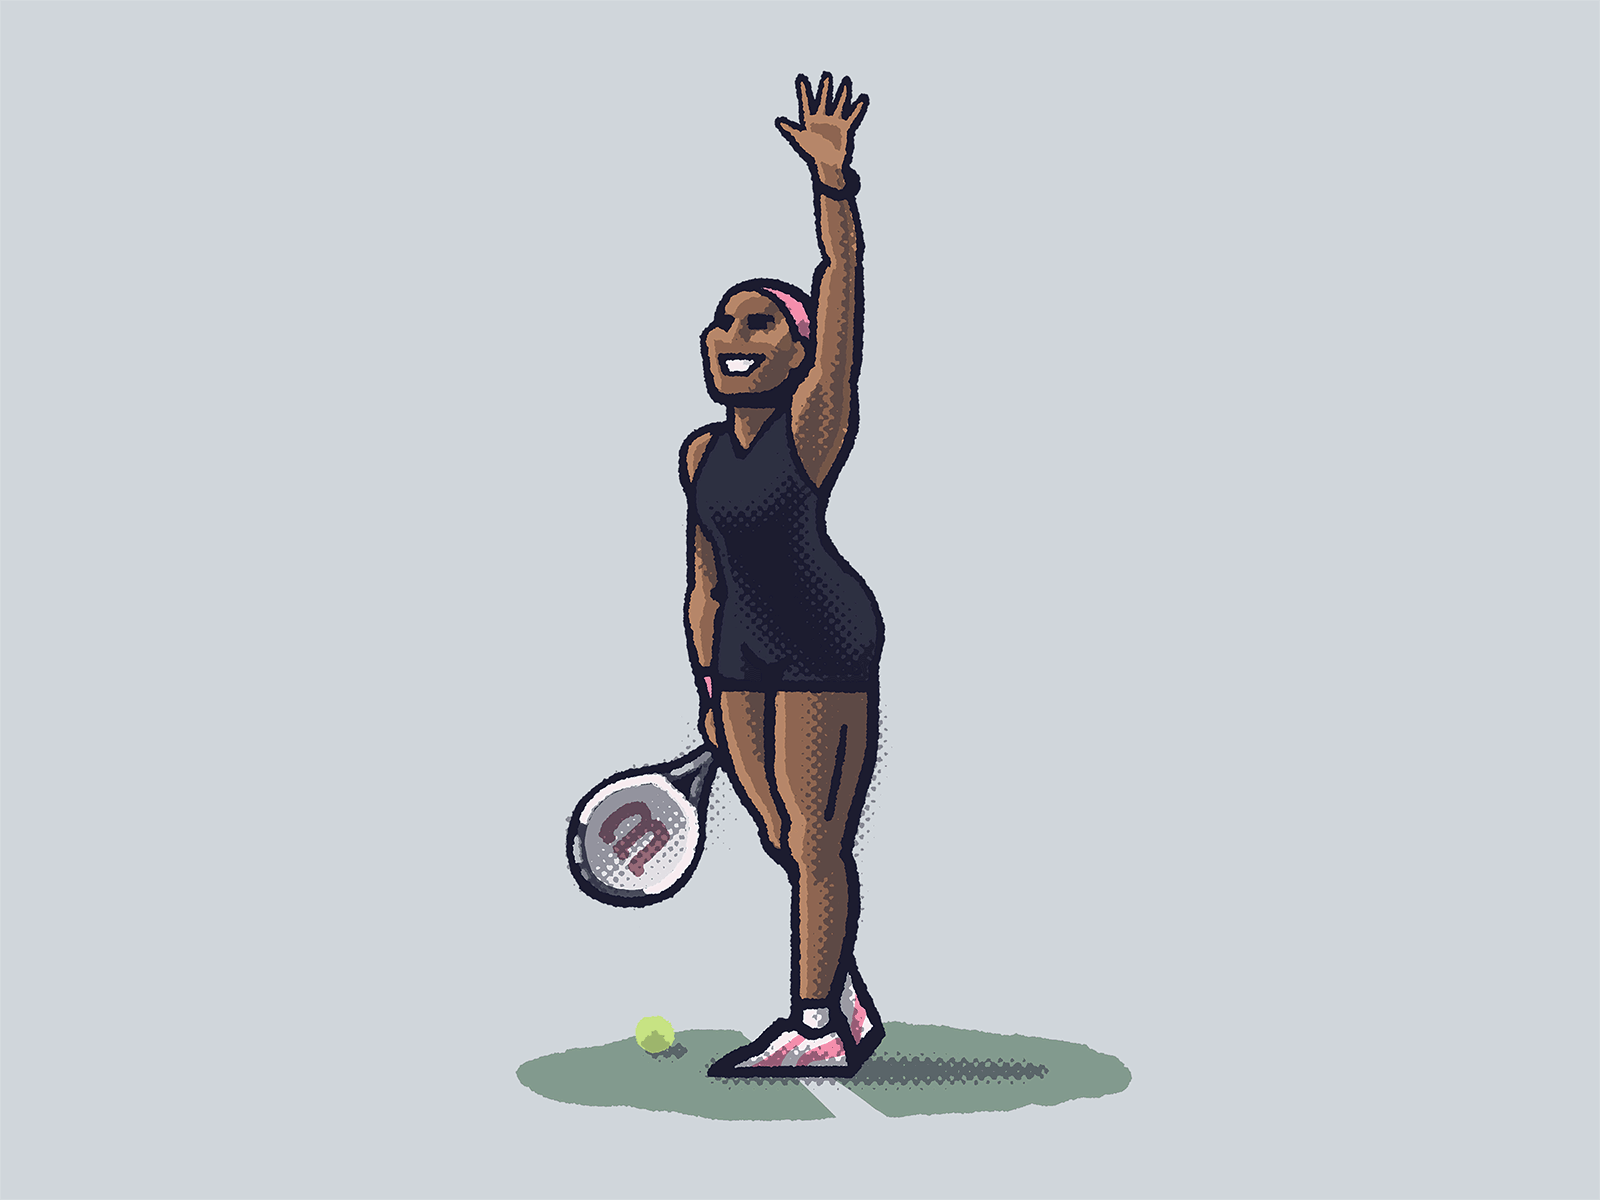 Serena Williams Animated Gif 2002 animated gif animation athlete drawing illustration looping animation looping gif mario portrait serena williams sports spot illustration tennis us open zucca